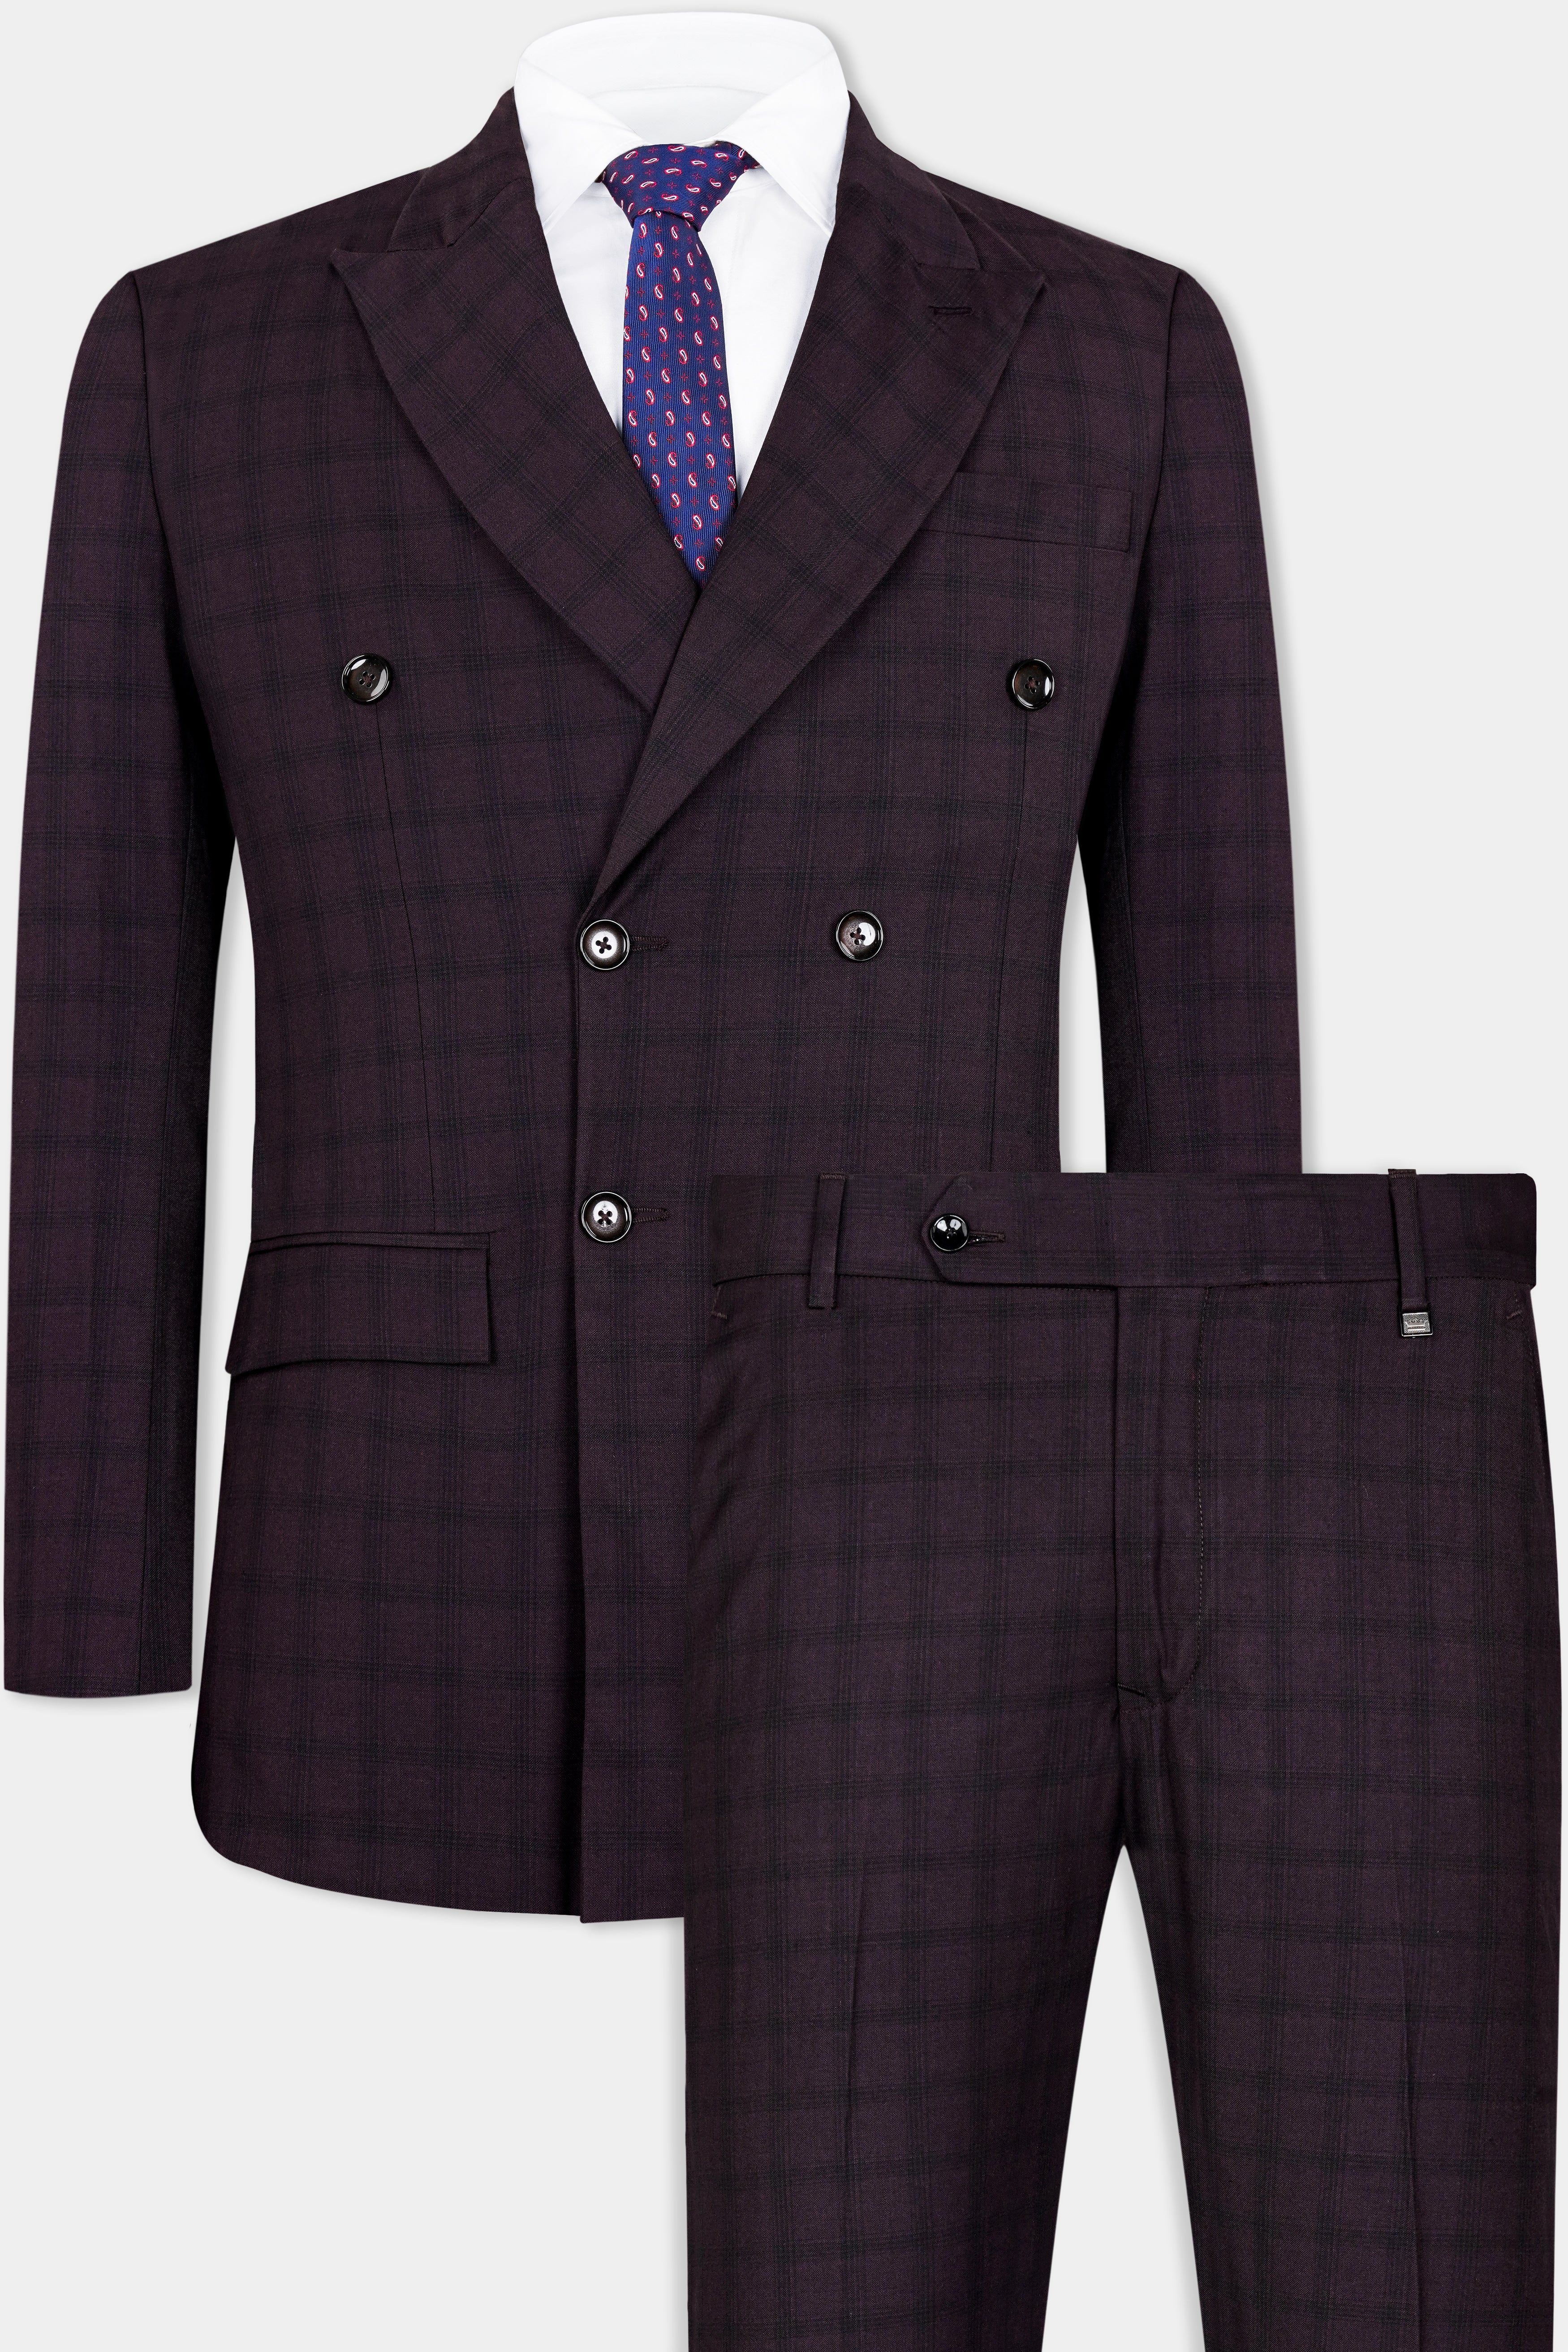 Cinder Purple Checkered Double Breasted Wool Rich Suit ST2916-DB-36,ST2916-DB-38,ST2916-DB-40,ST2916-DB-42,ST2916-DB-44,ST2916-DB-46,ST2916-DB-48,ST2916-DB-50,ST2916-DB-52,ST2916-DB-54,ST2916-DB-56,ST2916-DB-58,ST2916-DB-60